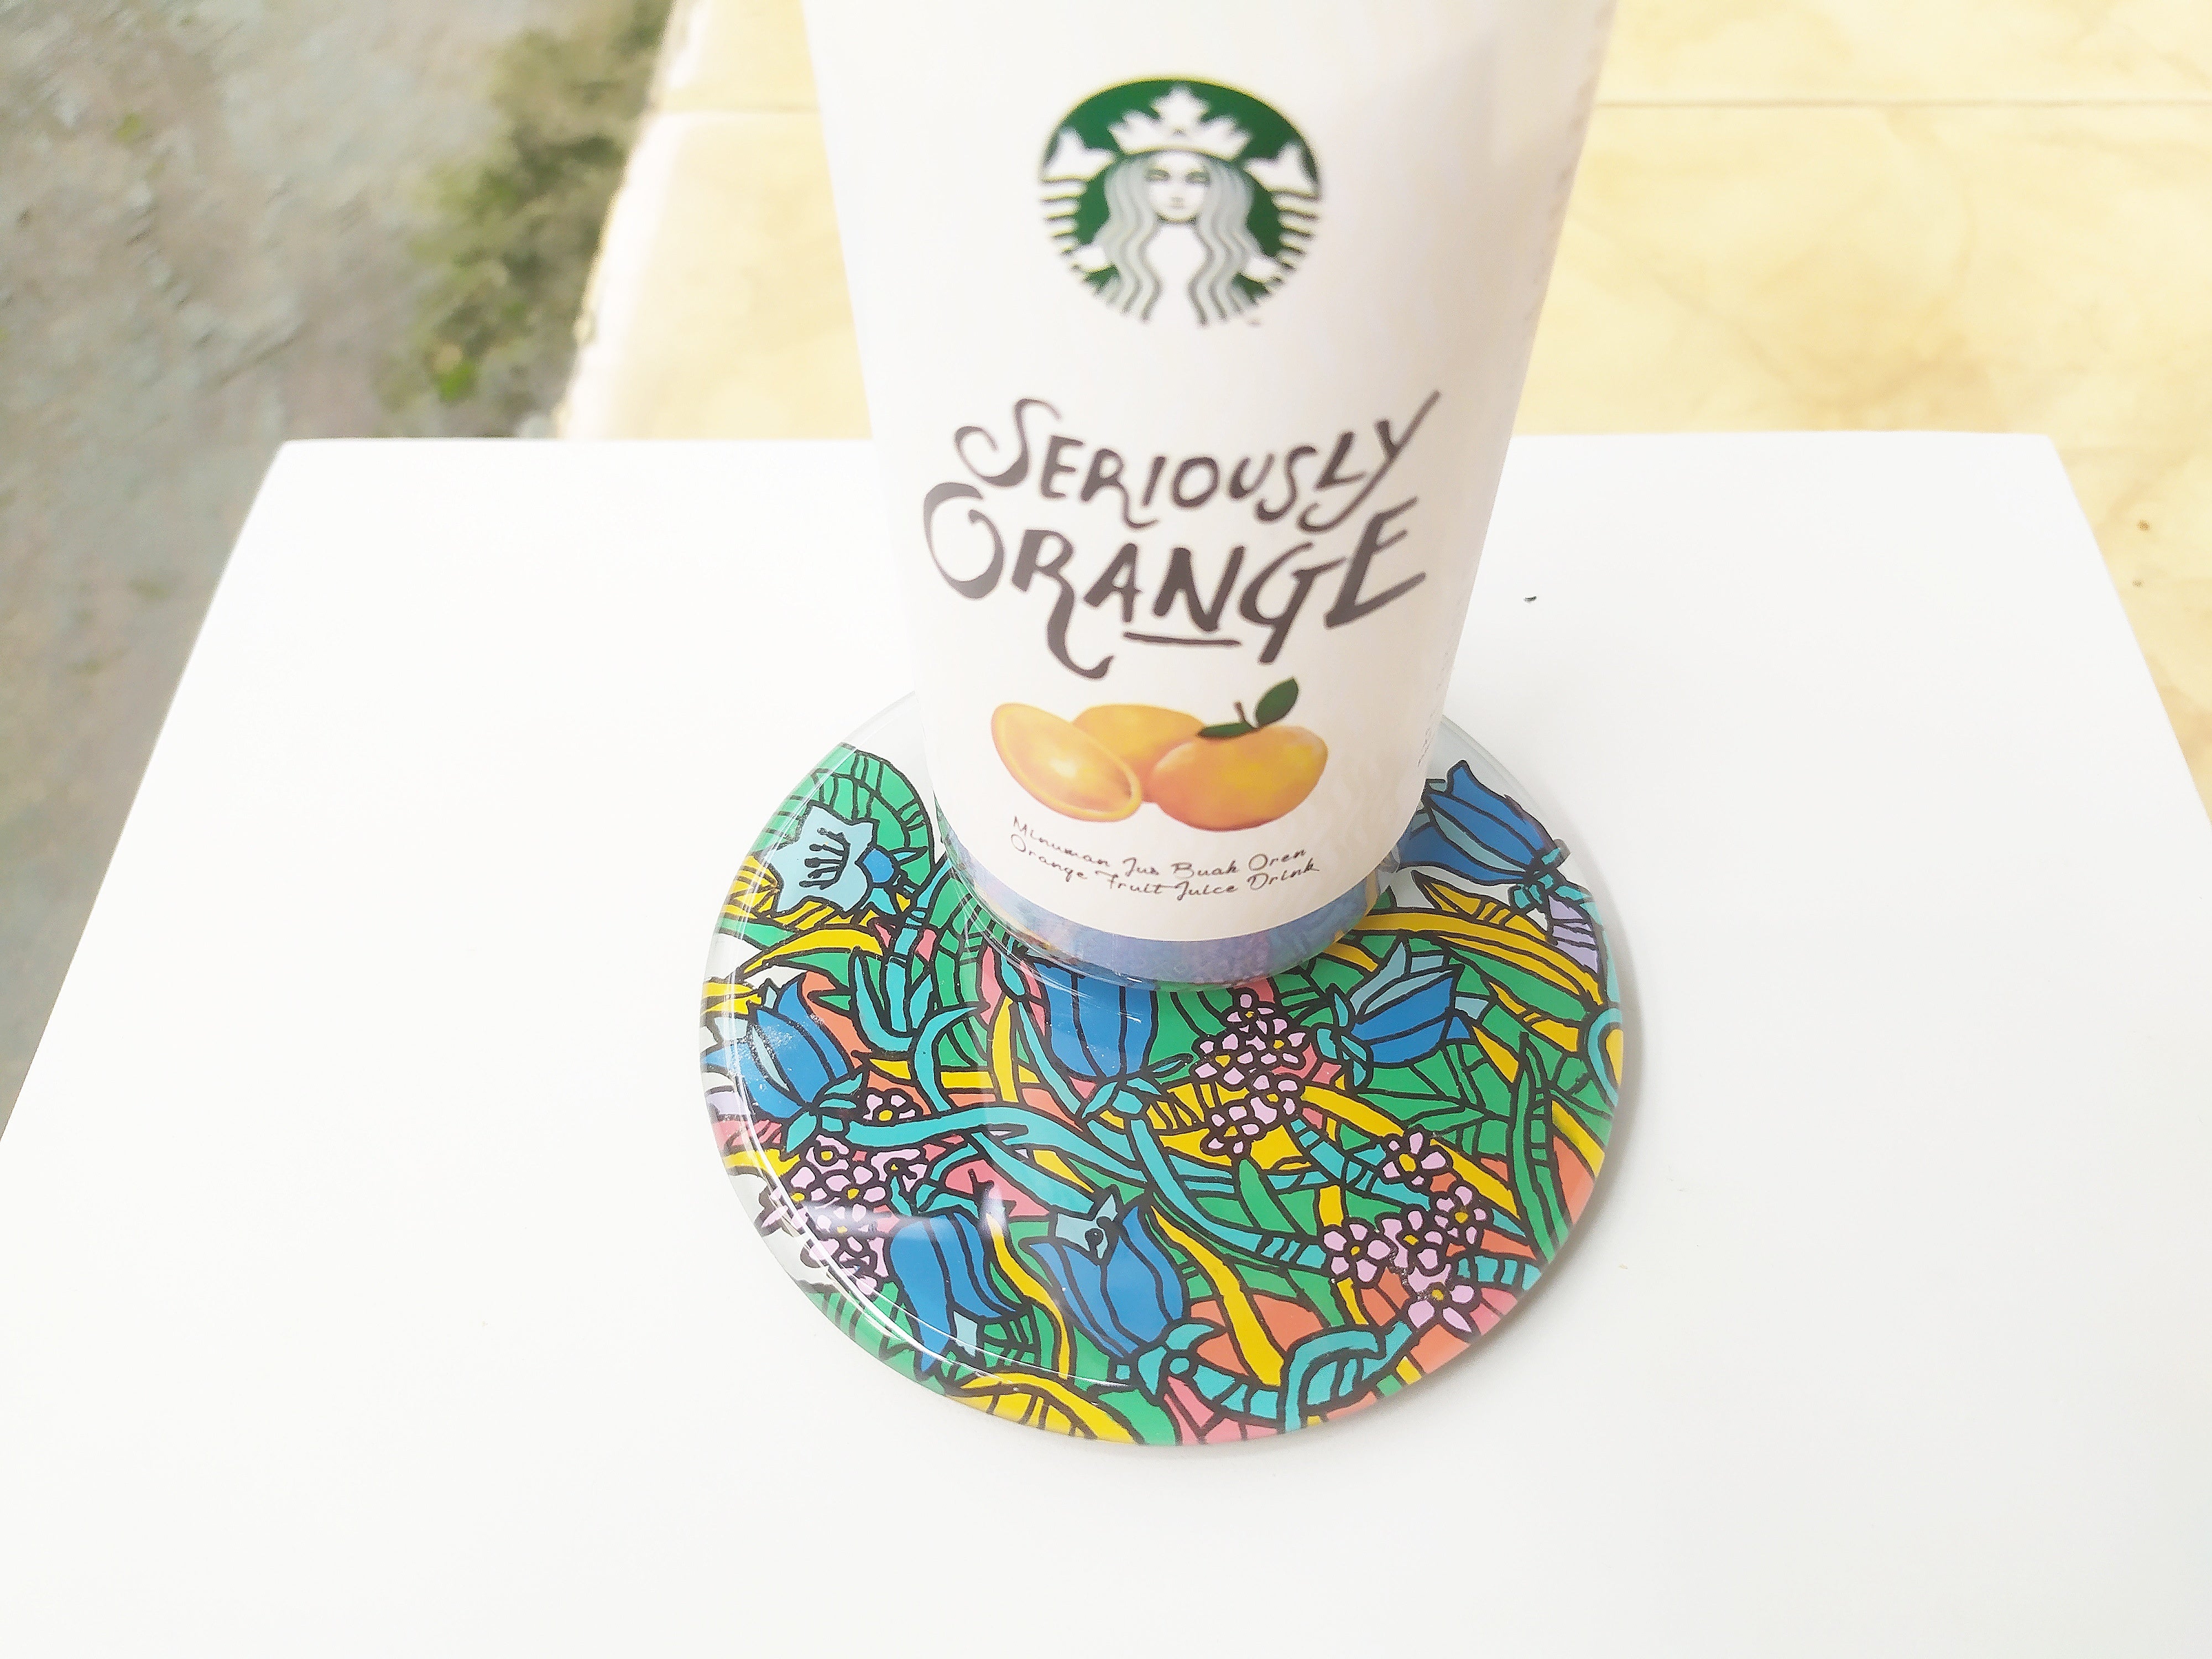 Reverse hand painted mirror and glass coaster with flower pattern , with starbuck cup